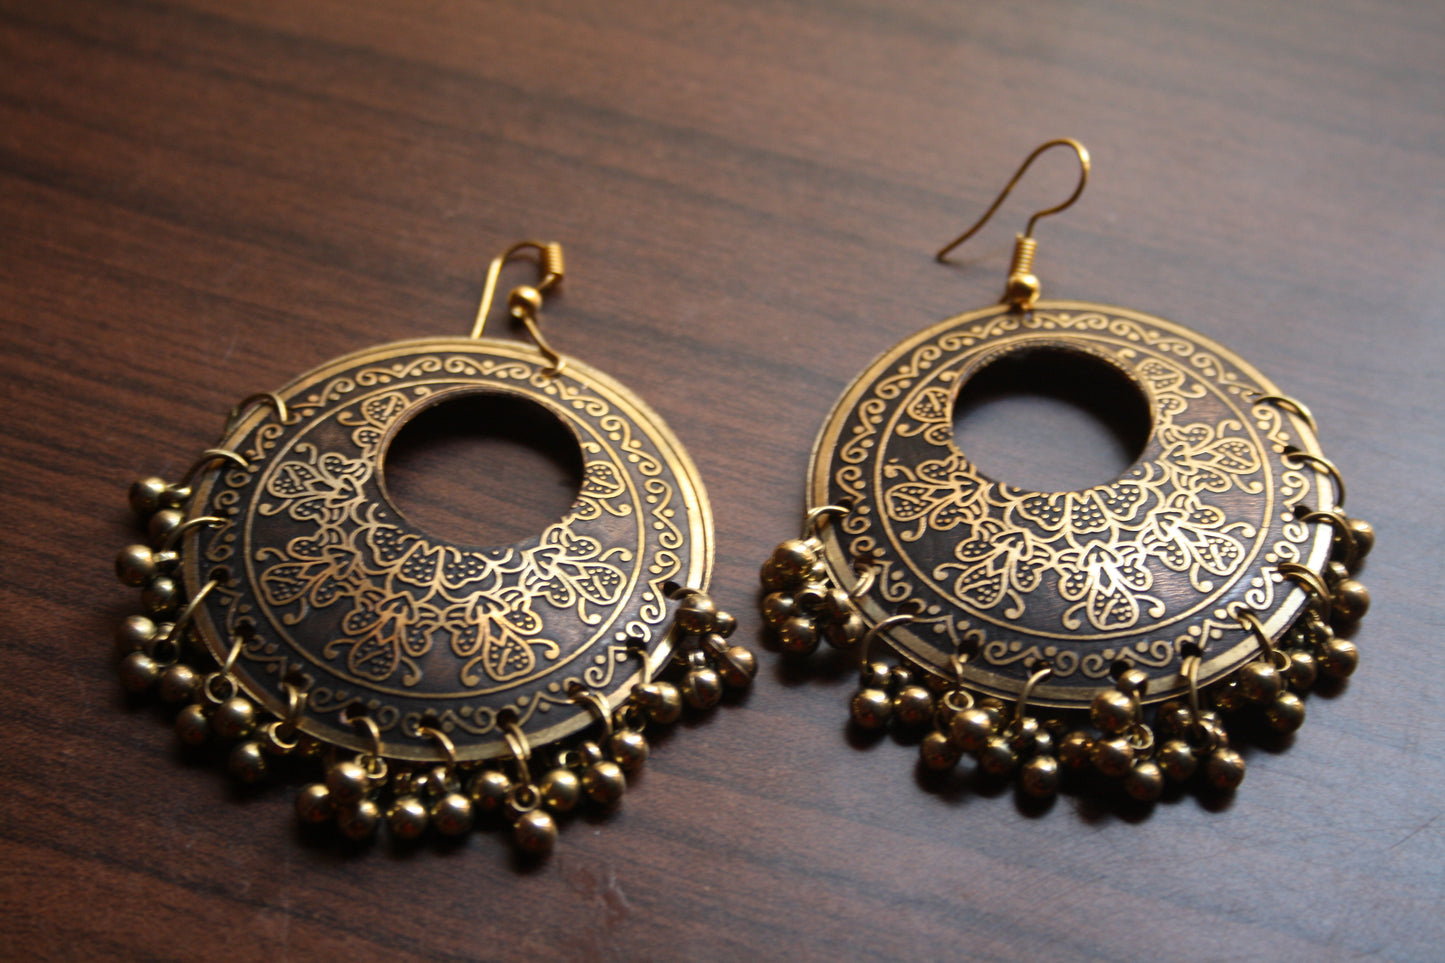 Large Carved Circular Danglers with Designer Cut and Beads - GlitterGleam